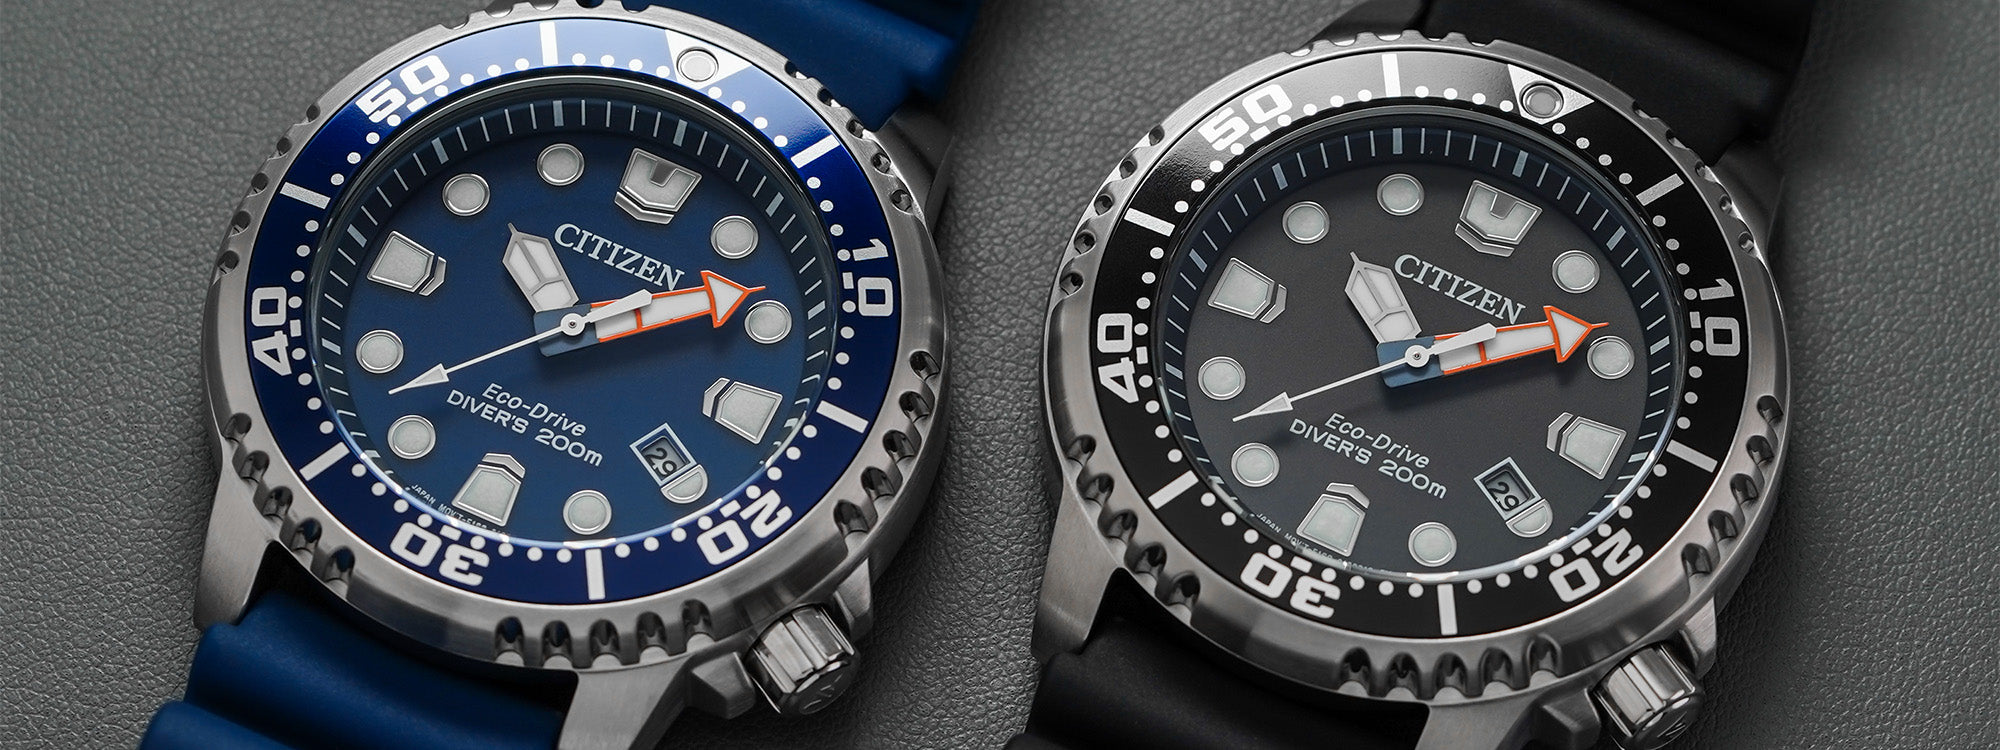 Citizen Dive Watches: A Comprehensive Guide from Eco-Drives to Automatics